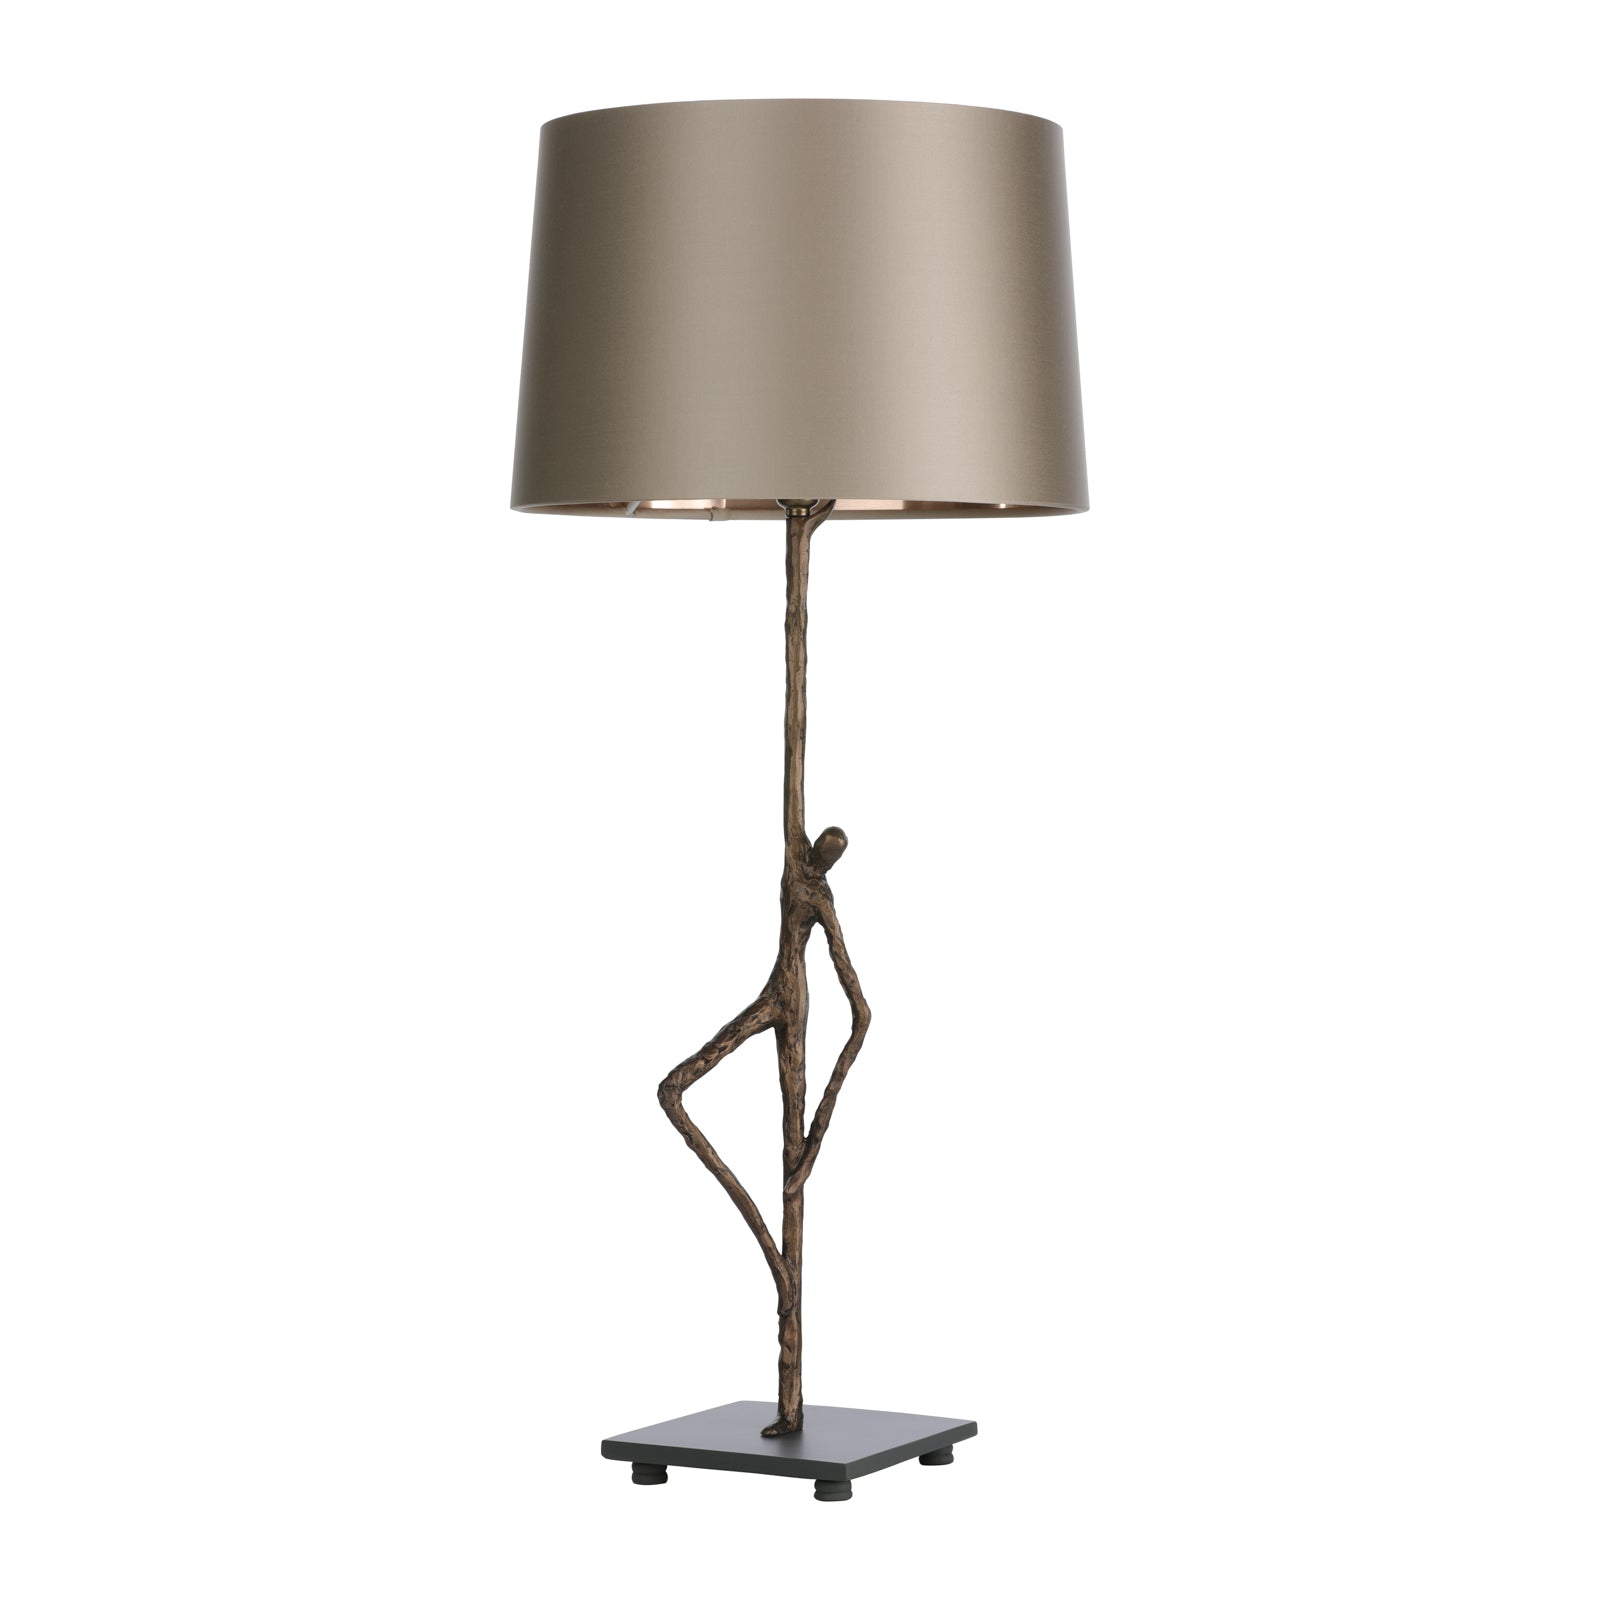 The Lowry table lamp by David Hunt Lighting finished in bronze shown with the TAP35 shade